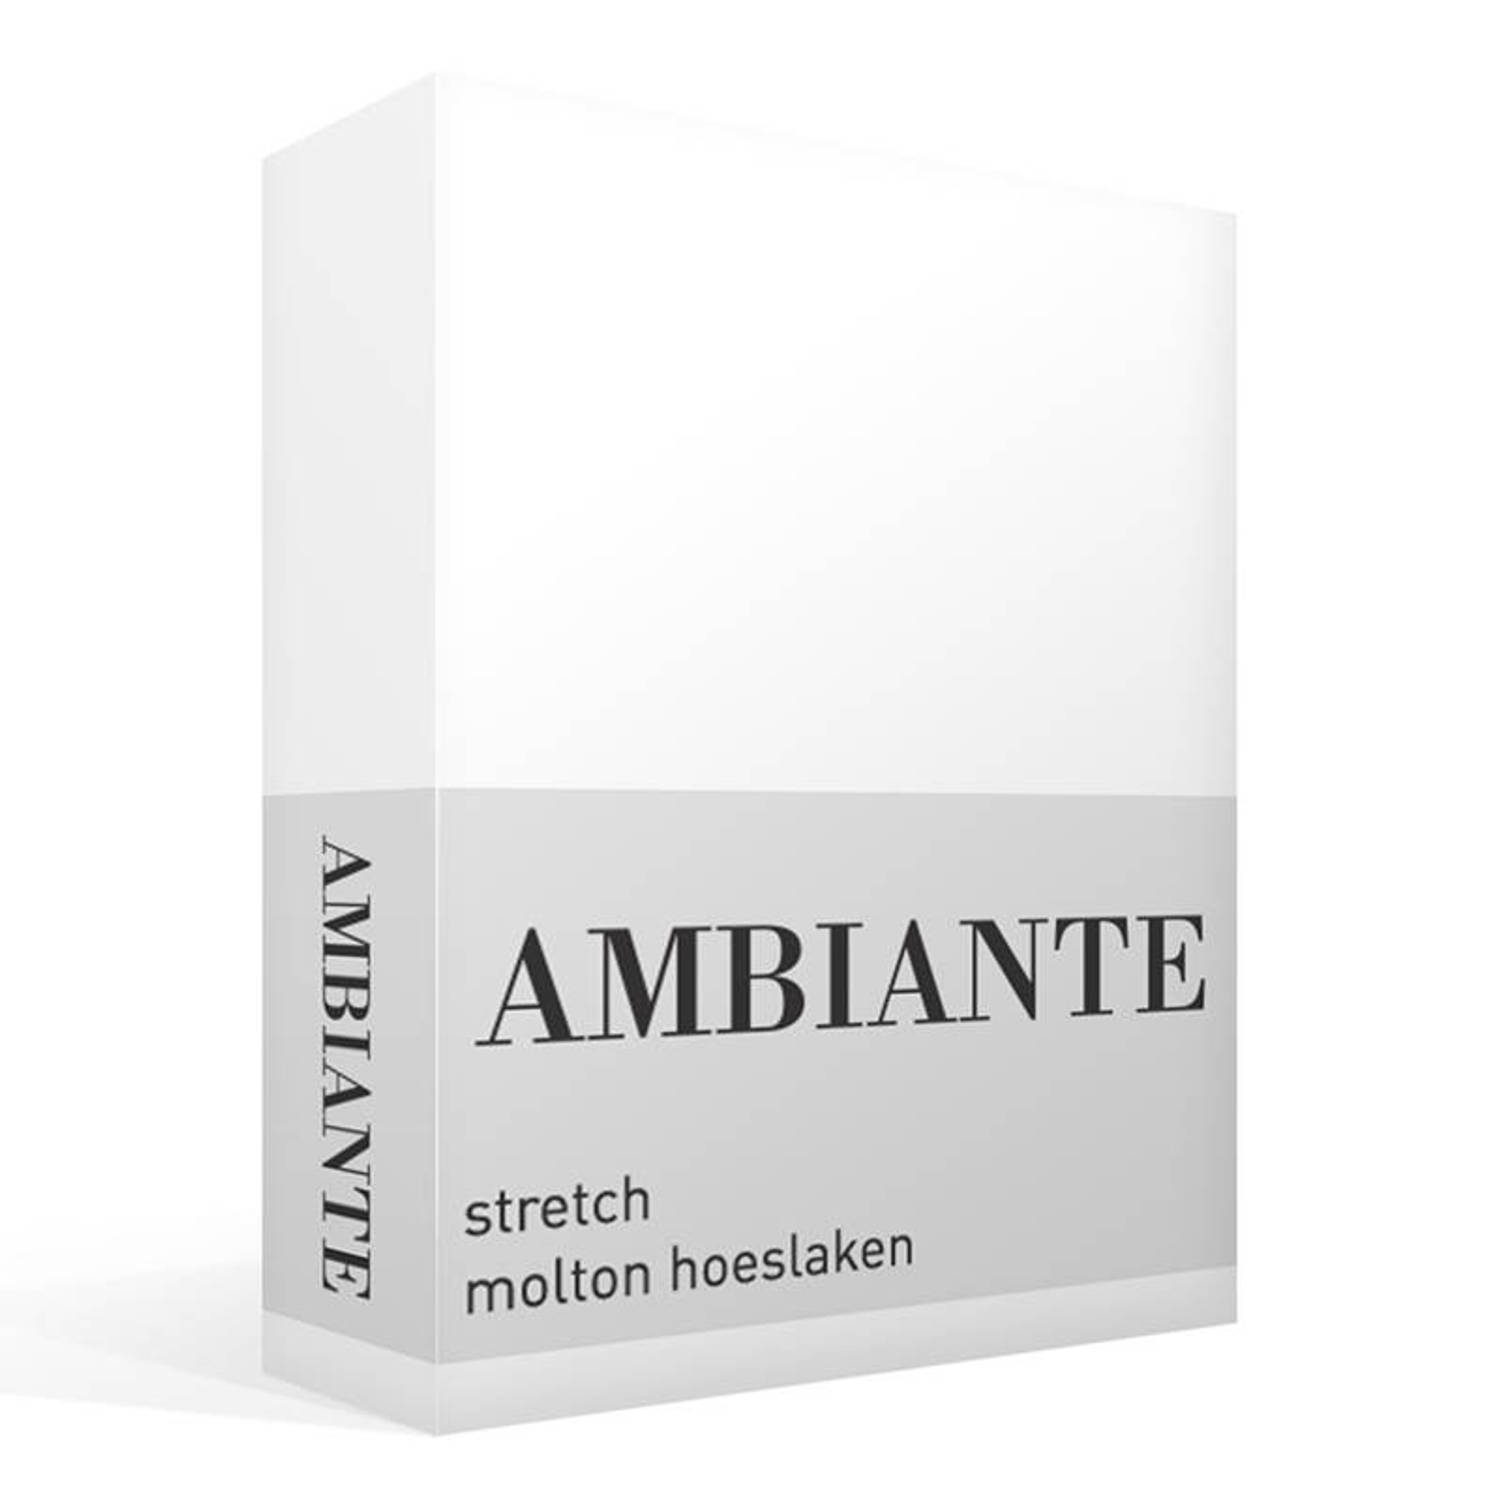 AMBIANTE Stretch Molton Hoeslaken - 60% Polyester - 40% Katoen - 2-persoons (120x200 Cm) - - Wit